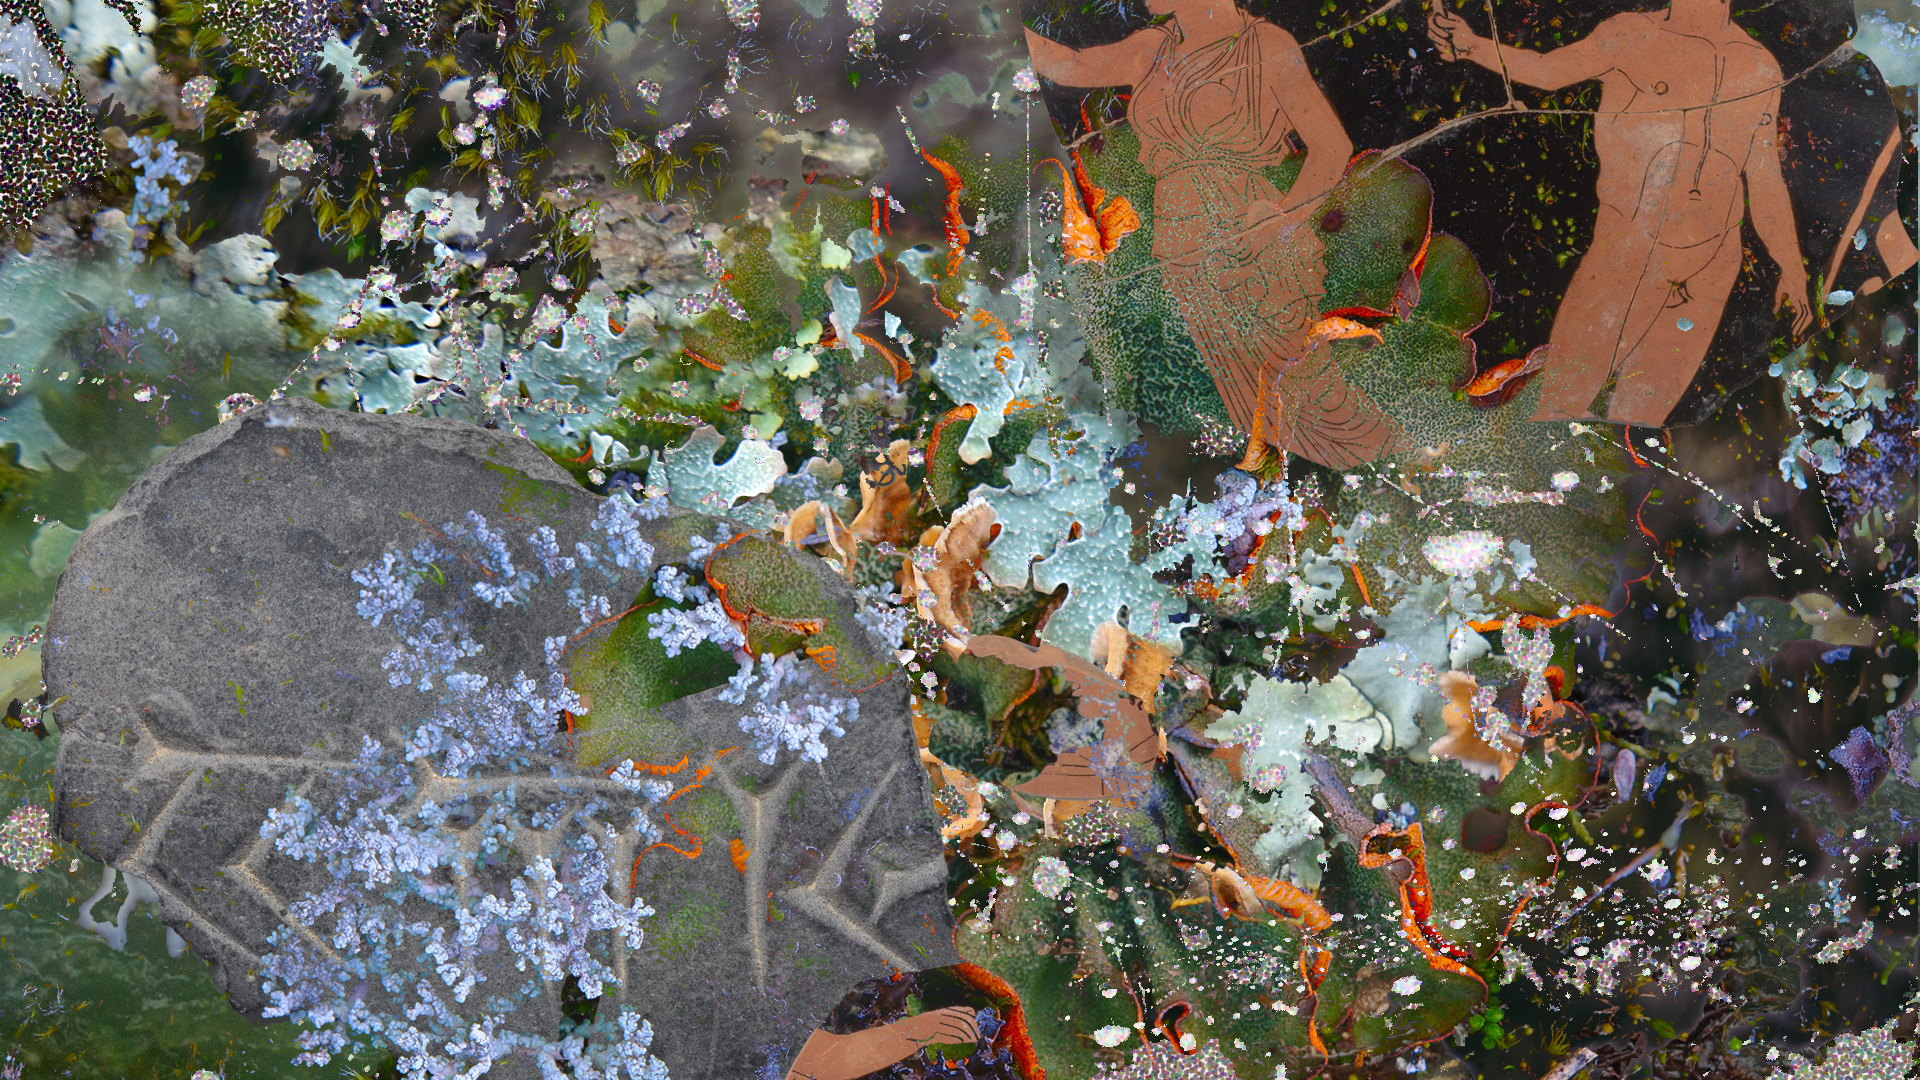 A collage with fragments of pottery and stone carvings, a spiderweb covered in dewdrops and colourful lichens